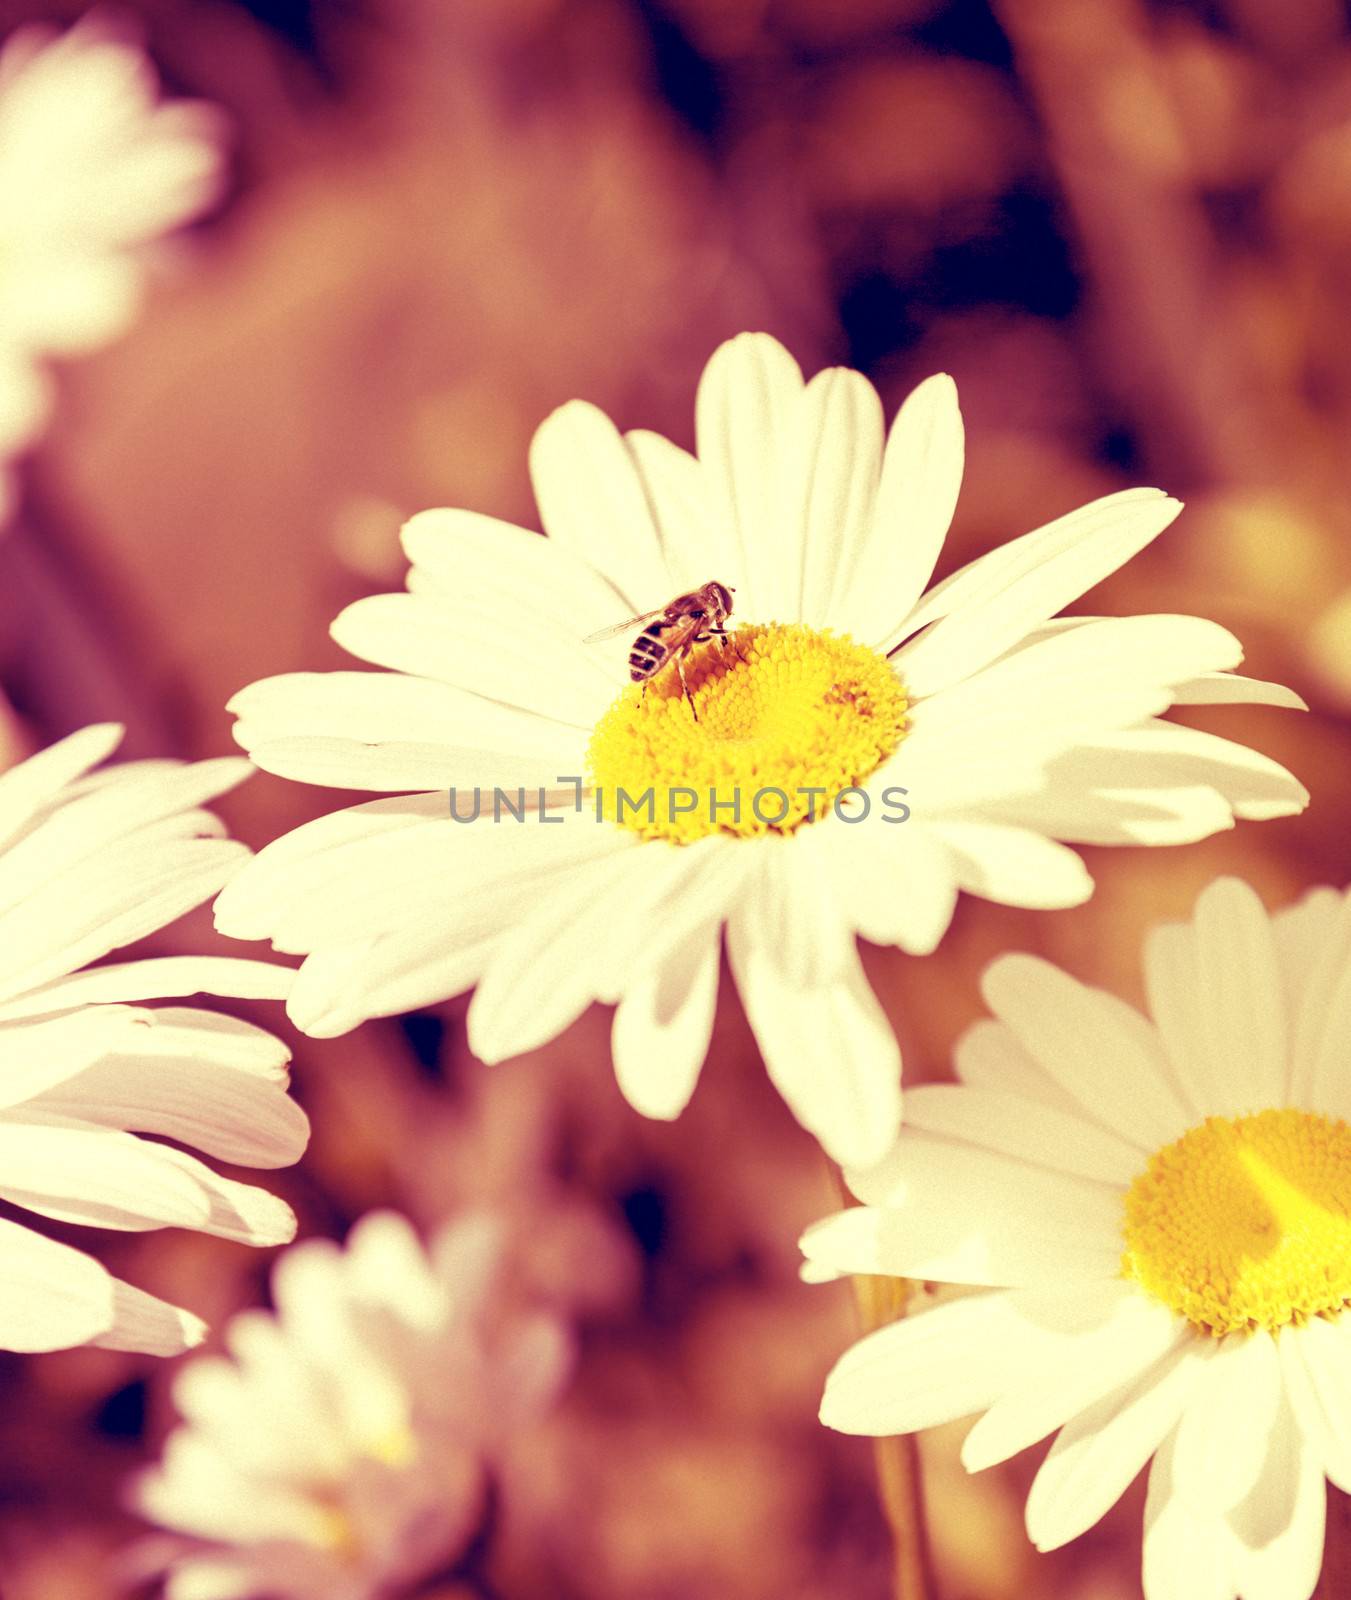 A bee wanders among the daisies, aged look version.